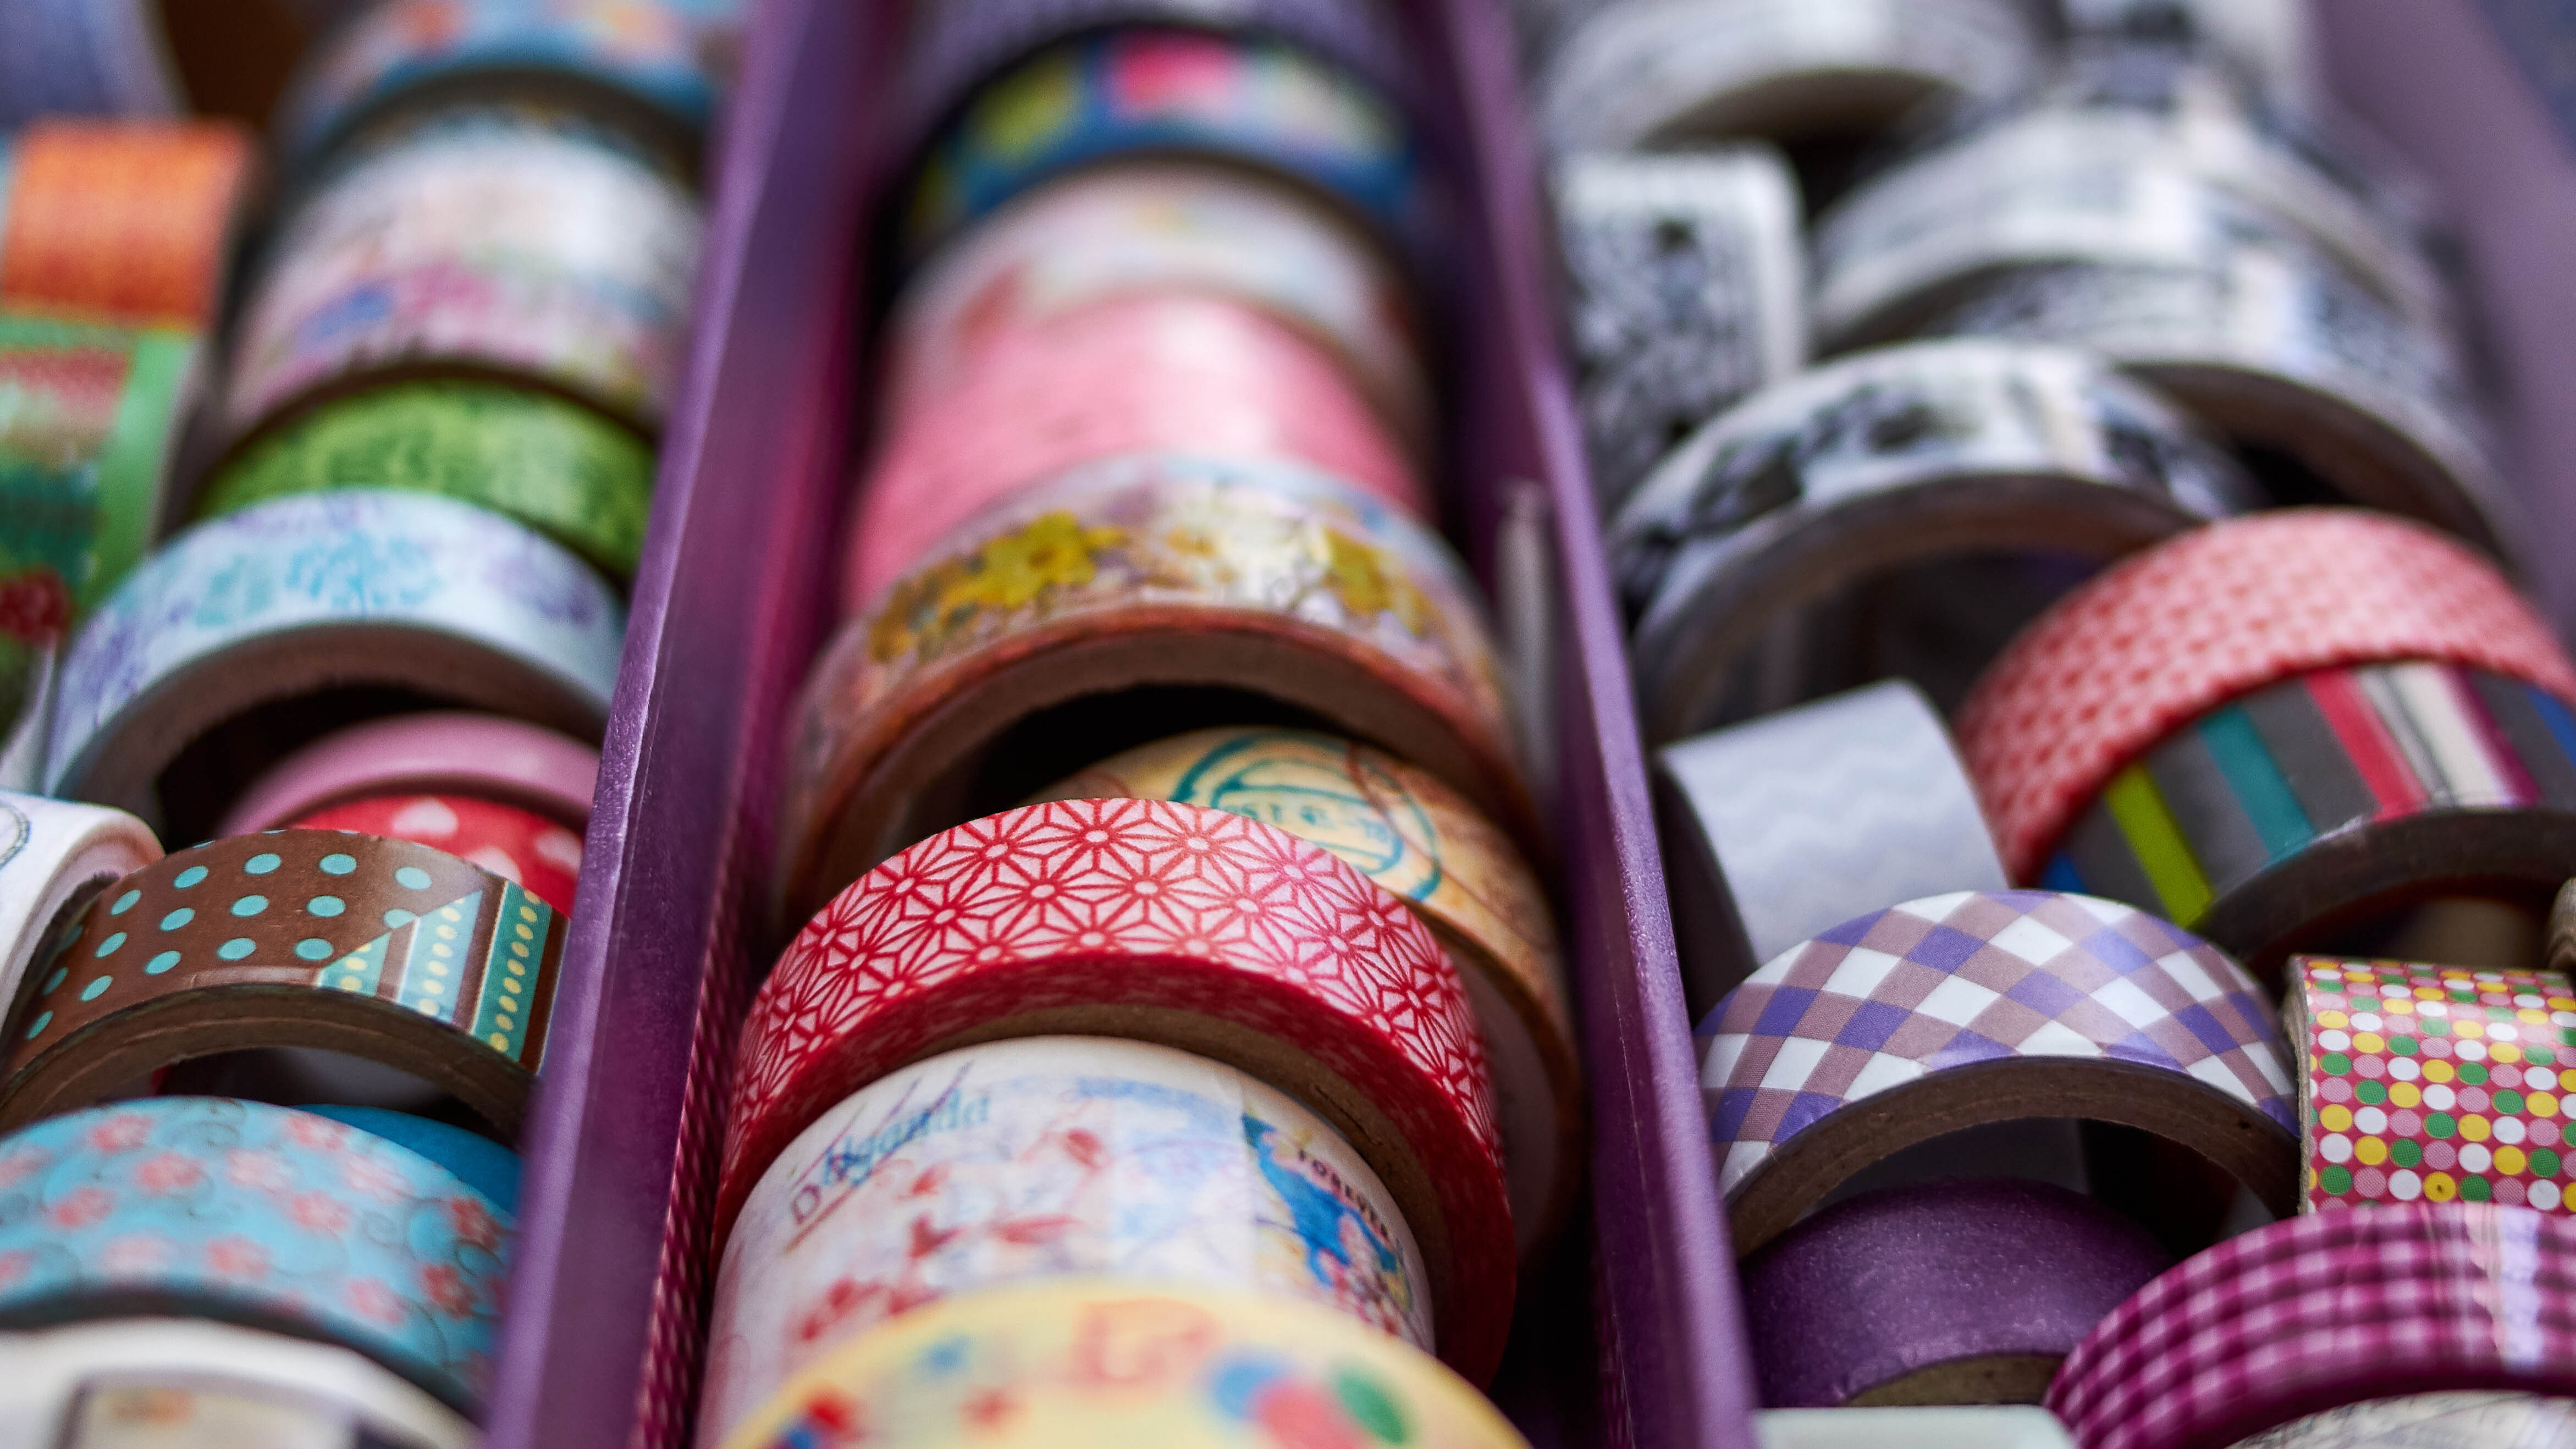 A selection of plain and patterned non plastic crafting tape